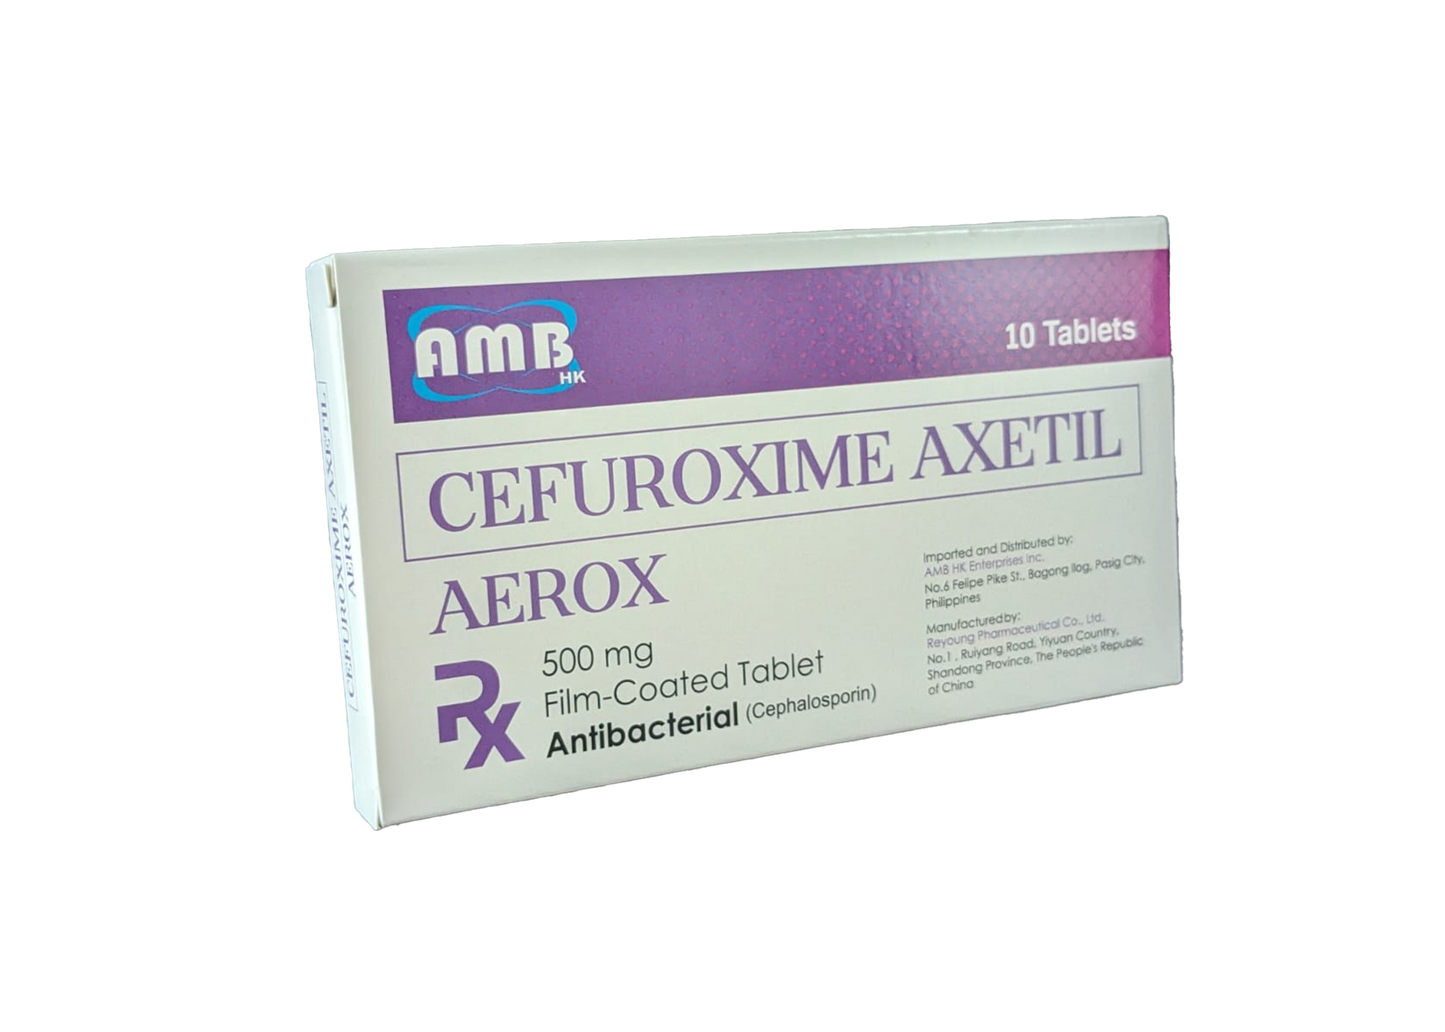 Cefuroxime Axetil (500mg) 15 Tablets